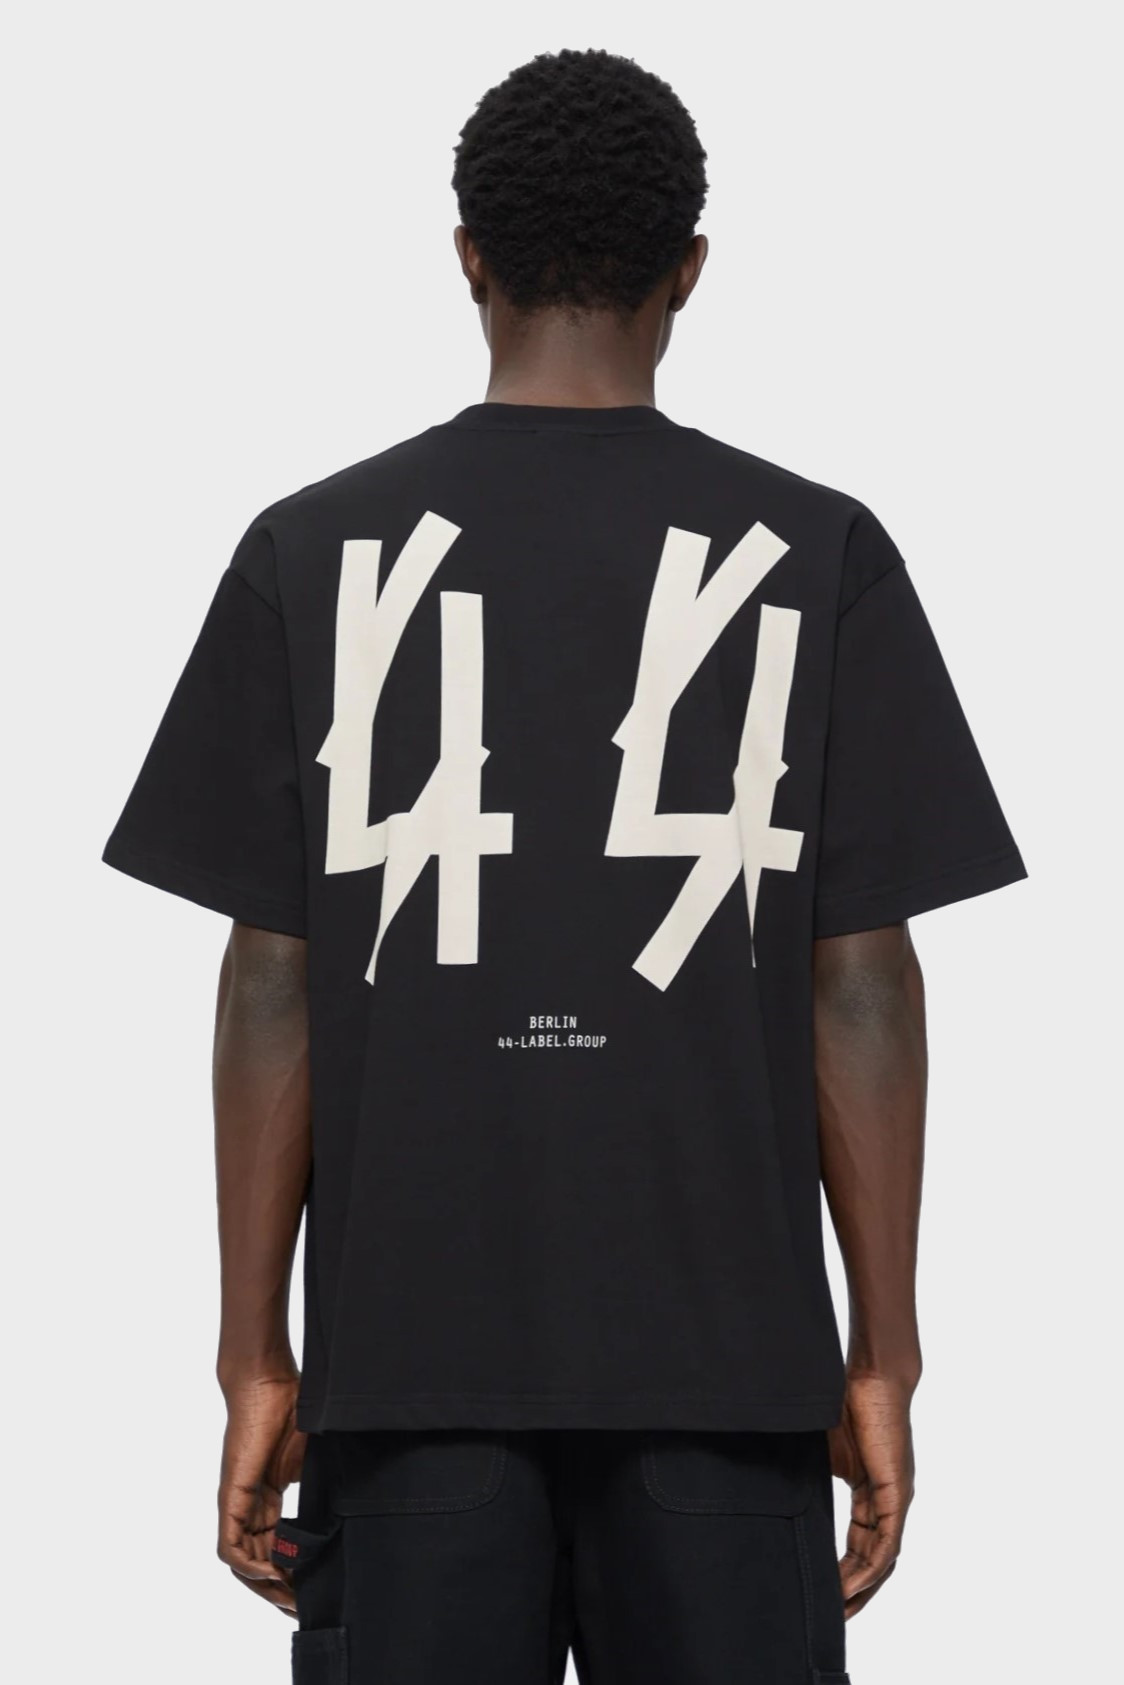 44 LABEL GROUP Classic T in Black/Dirty White